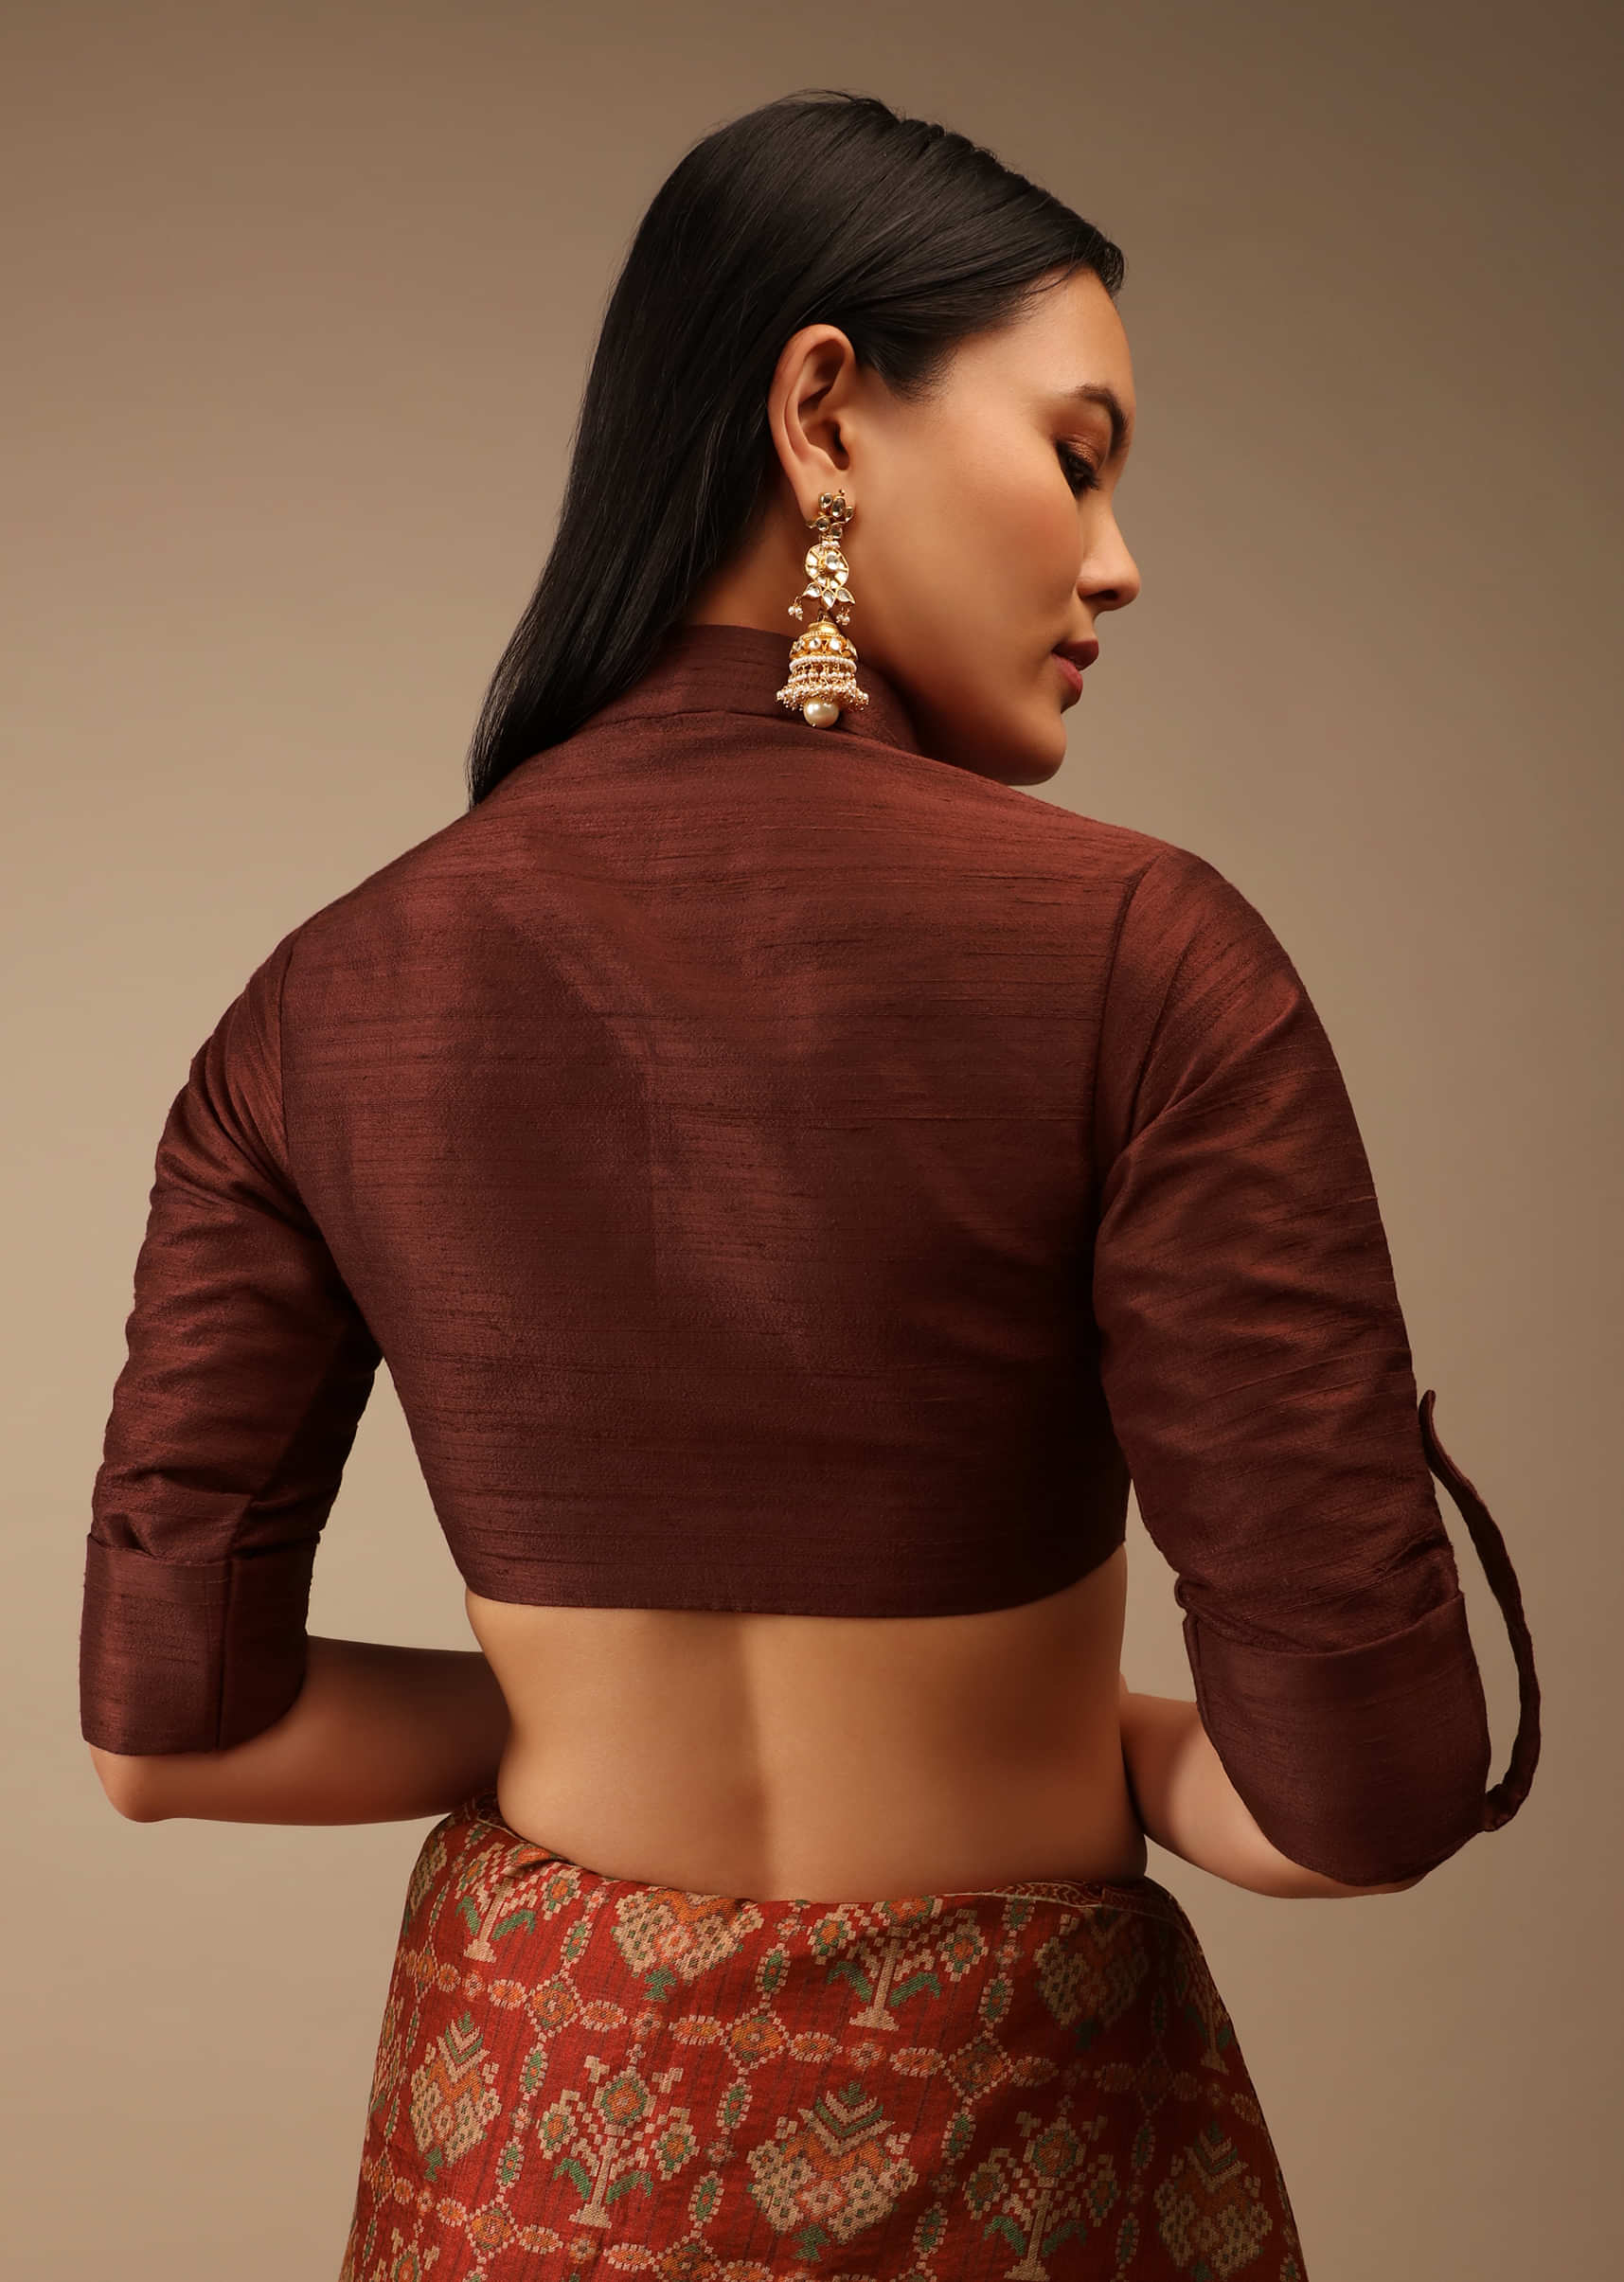 Coffee Brown Blouse In Raw Silk With Mandarin Collar, Front Hook Closure And Three Quarter Folded Sleeves